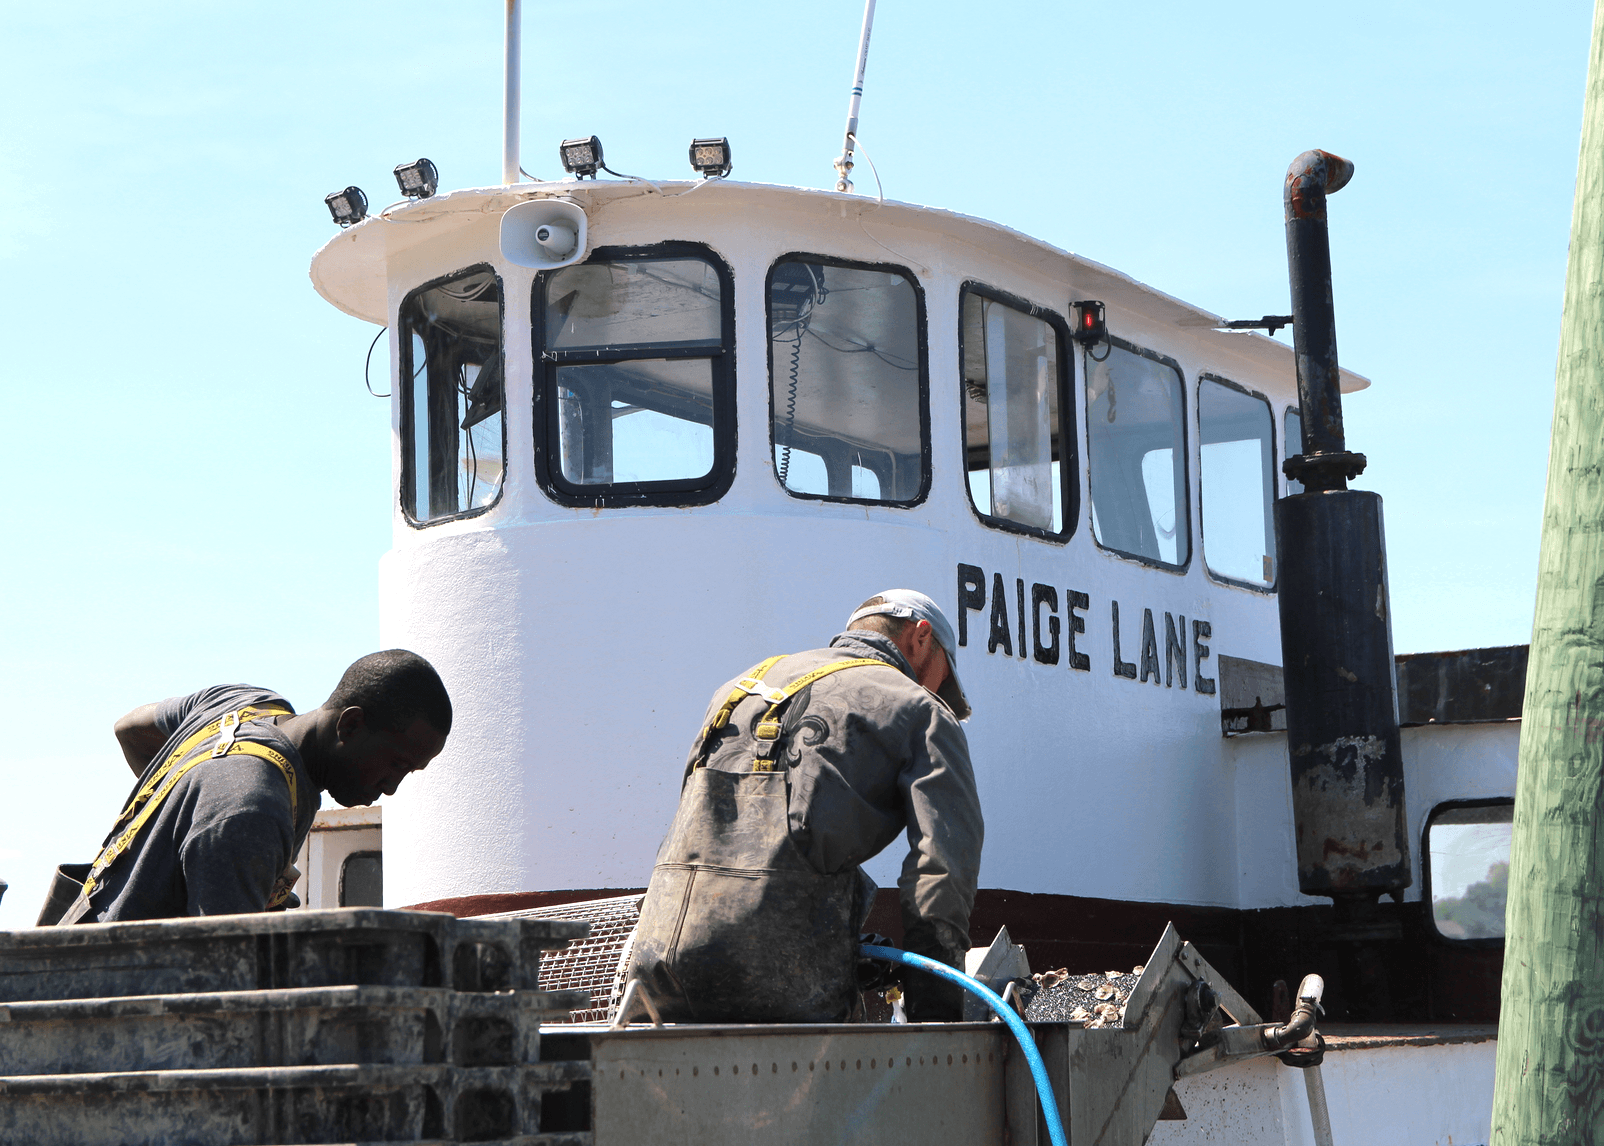 Workers from Stella Mar Oysters aboard the Paige Lane oyster barge at Experience the Sound. June 23, 2019 Photo: Leslie Yager